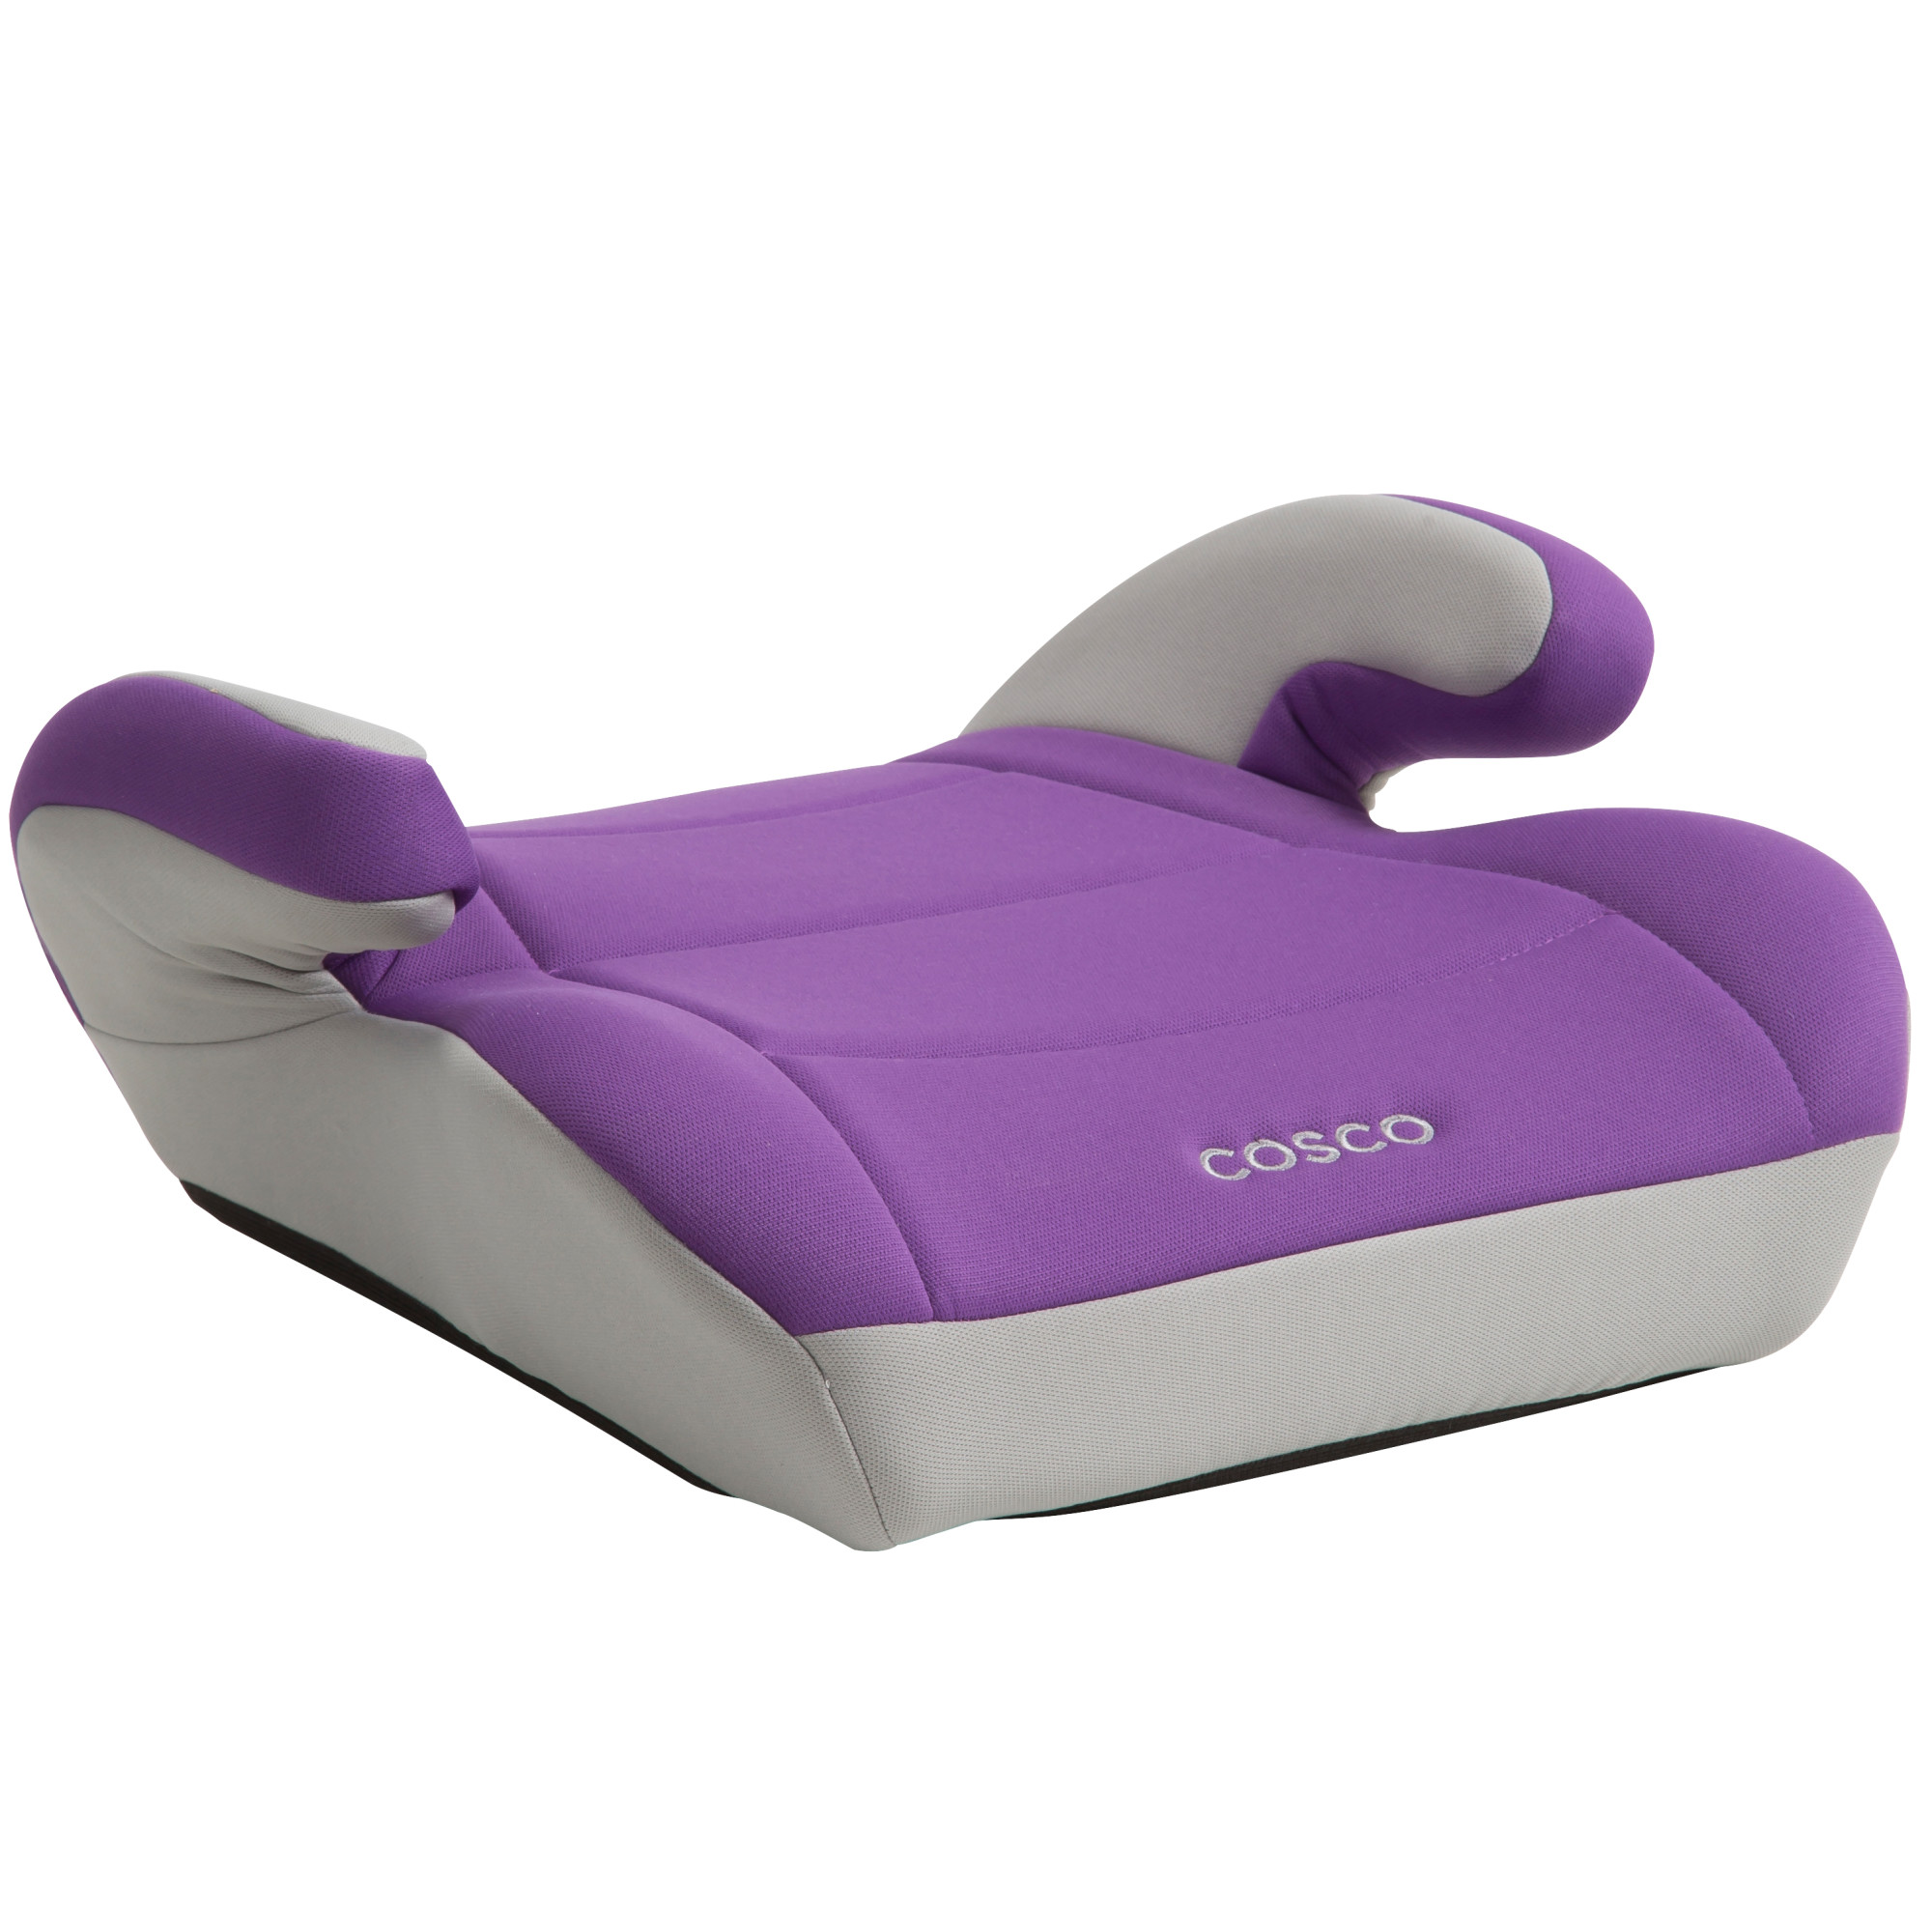 Cosco Topside Booster Car Seat - image 3 of 4